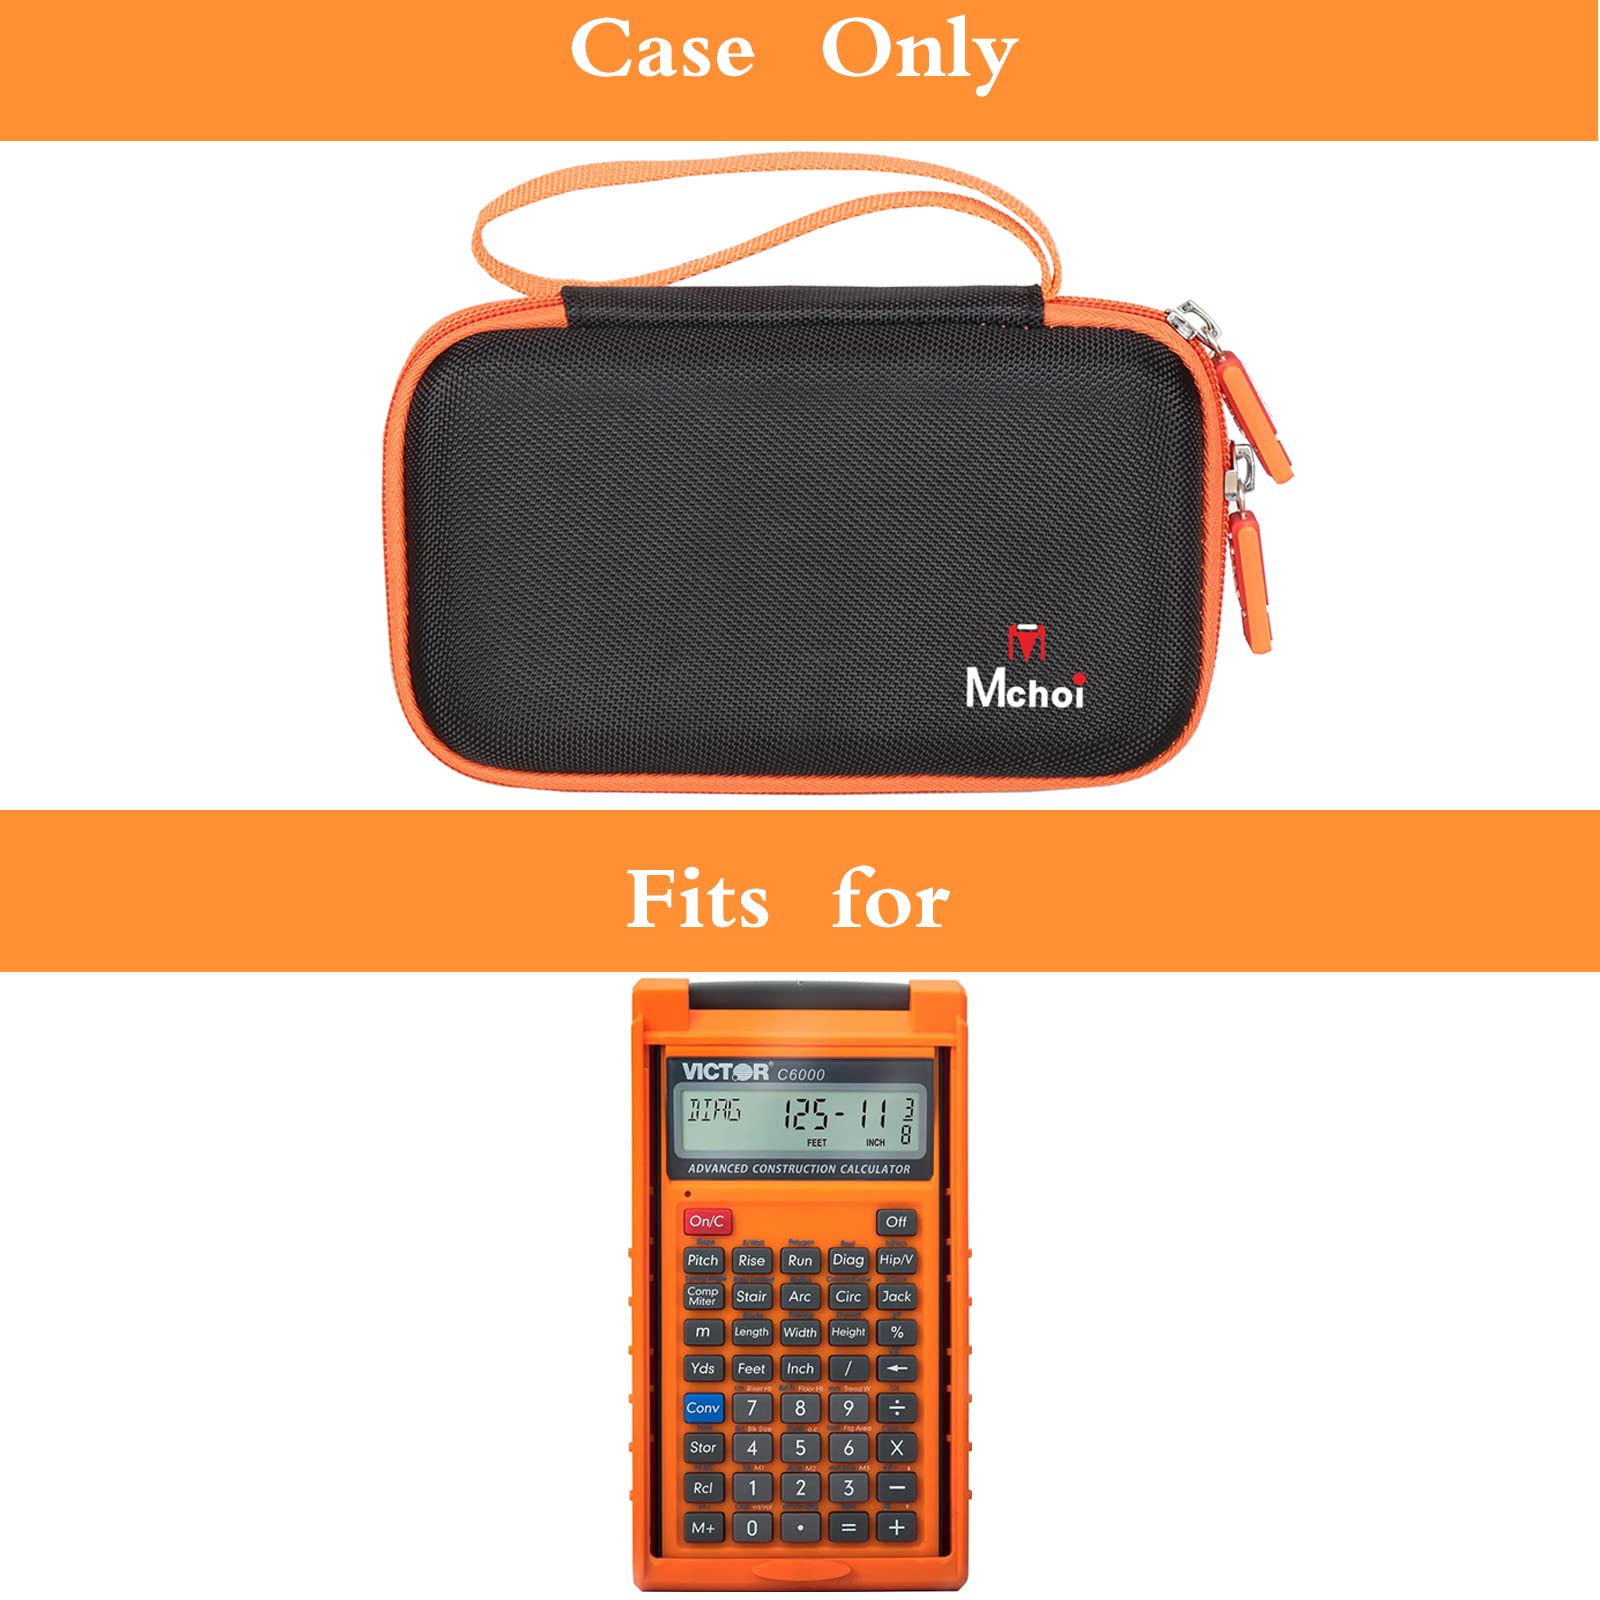 Mchoi Calculator Cases Fits for Calculated Industries 4065/4080 Construction Master Pro Calculator & Victor C6000 Advanced Construction Calculator, Case Only